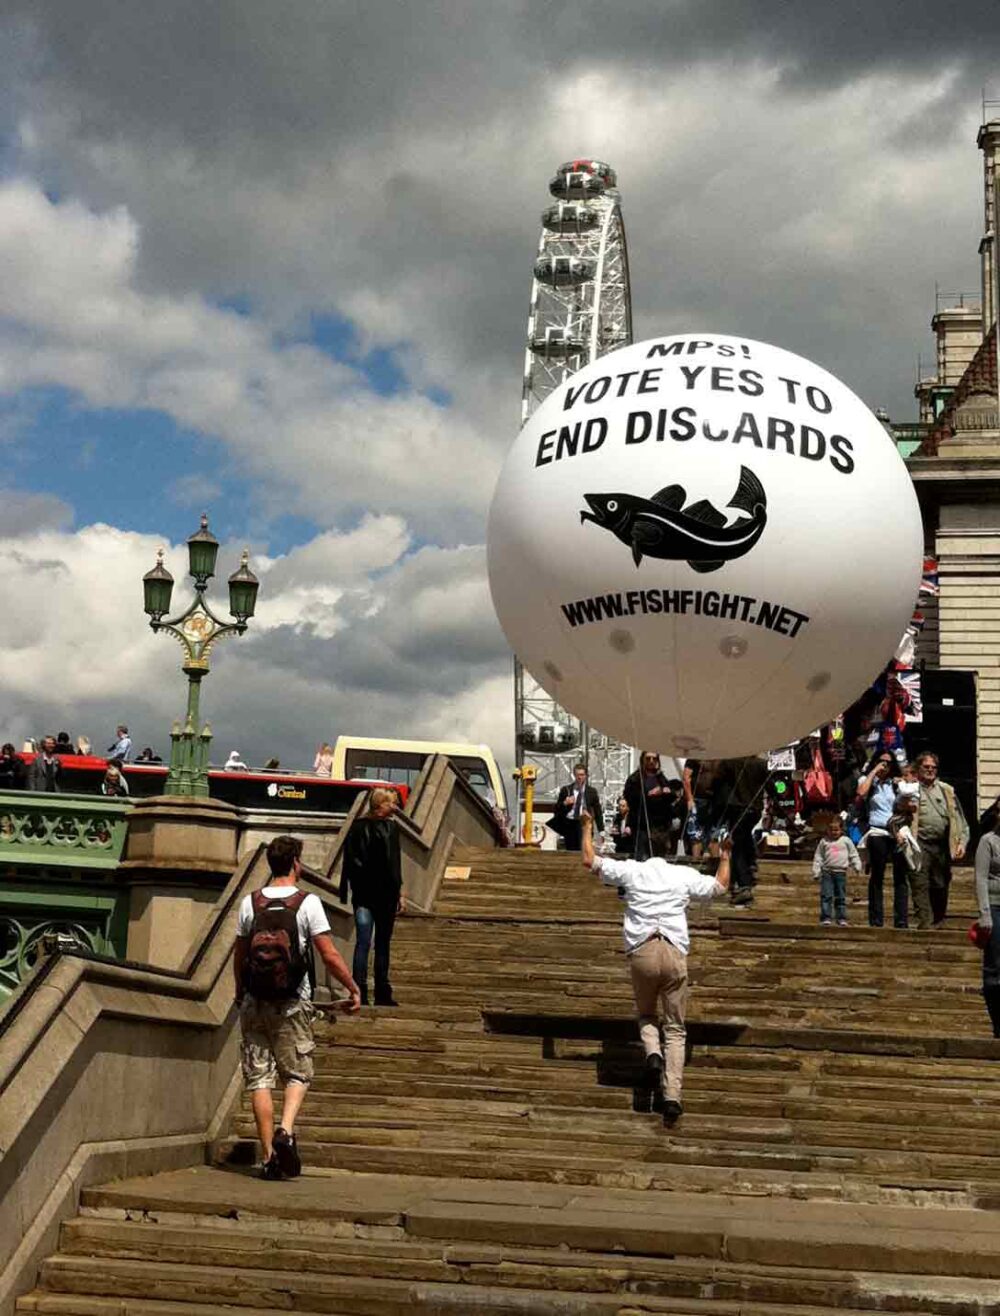 FishFight campaign sphere being carried up steps near London Eye